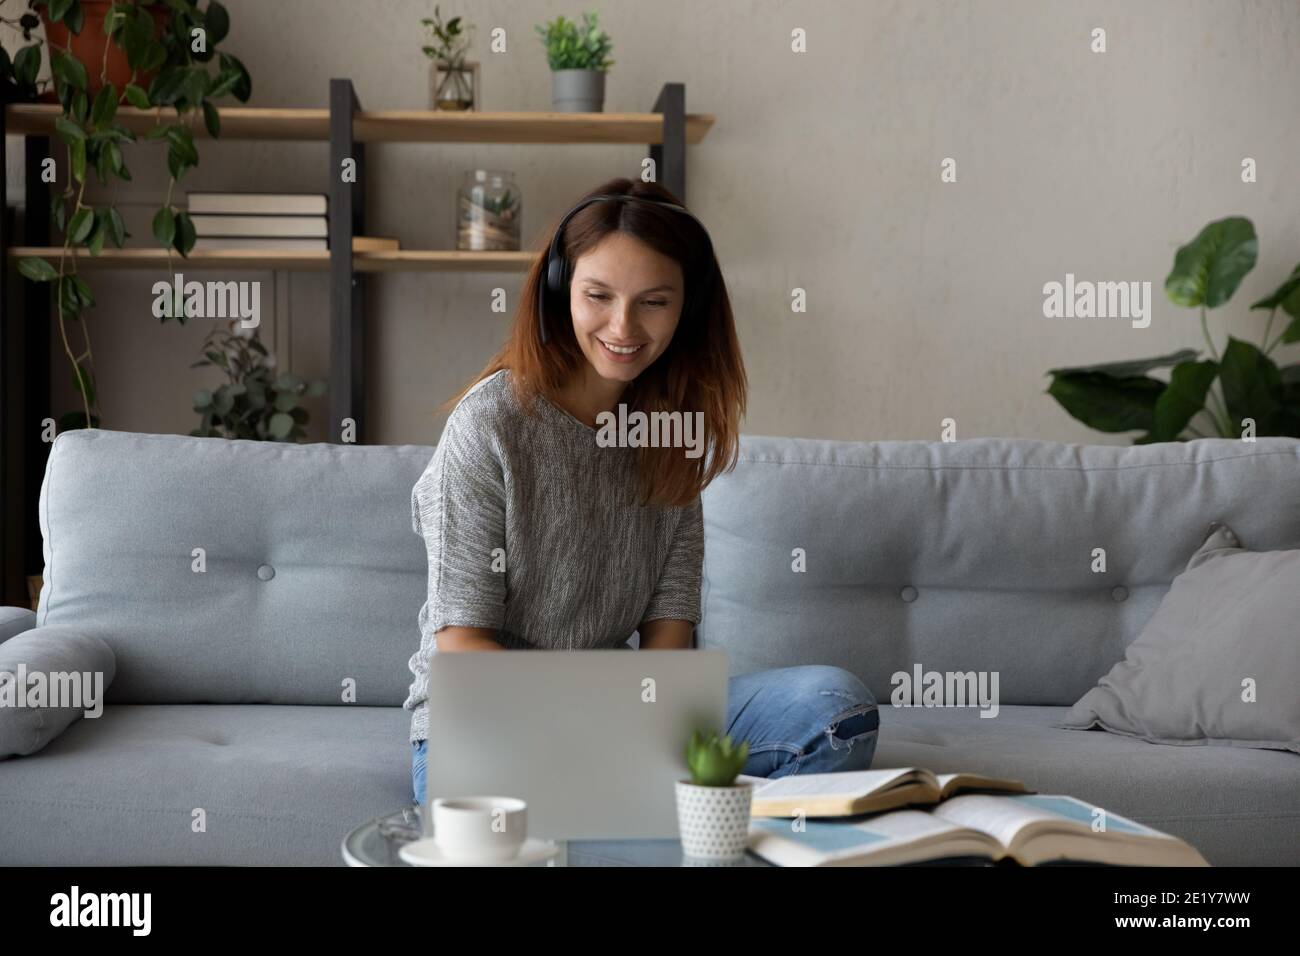 Smiling woman in headphones study online at home Stock Photo